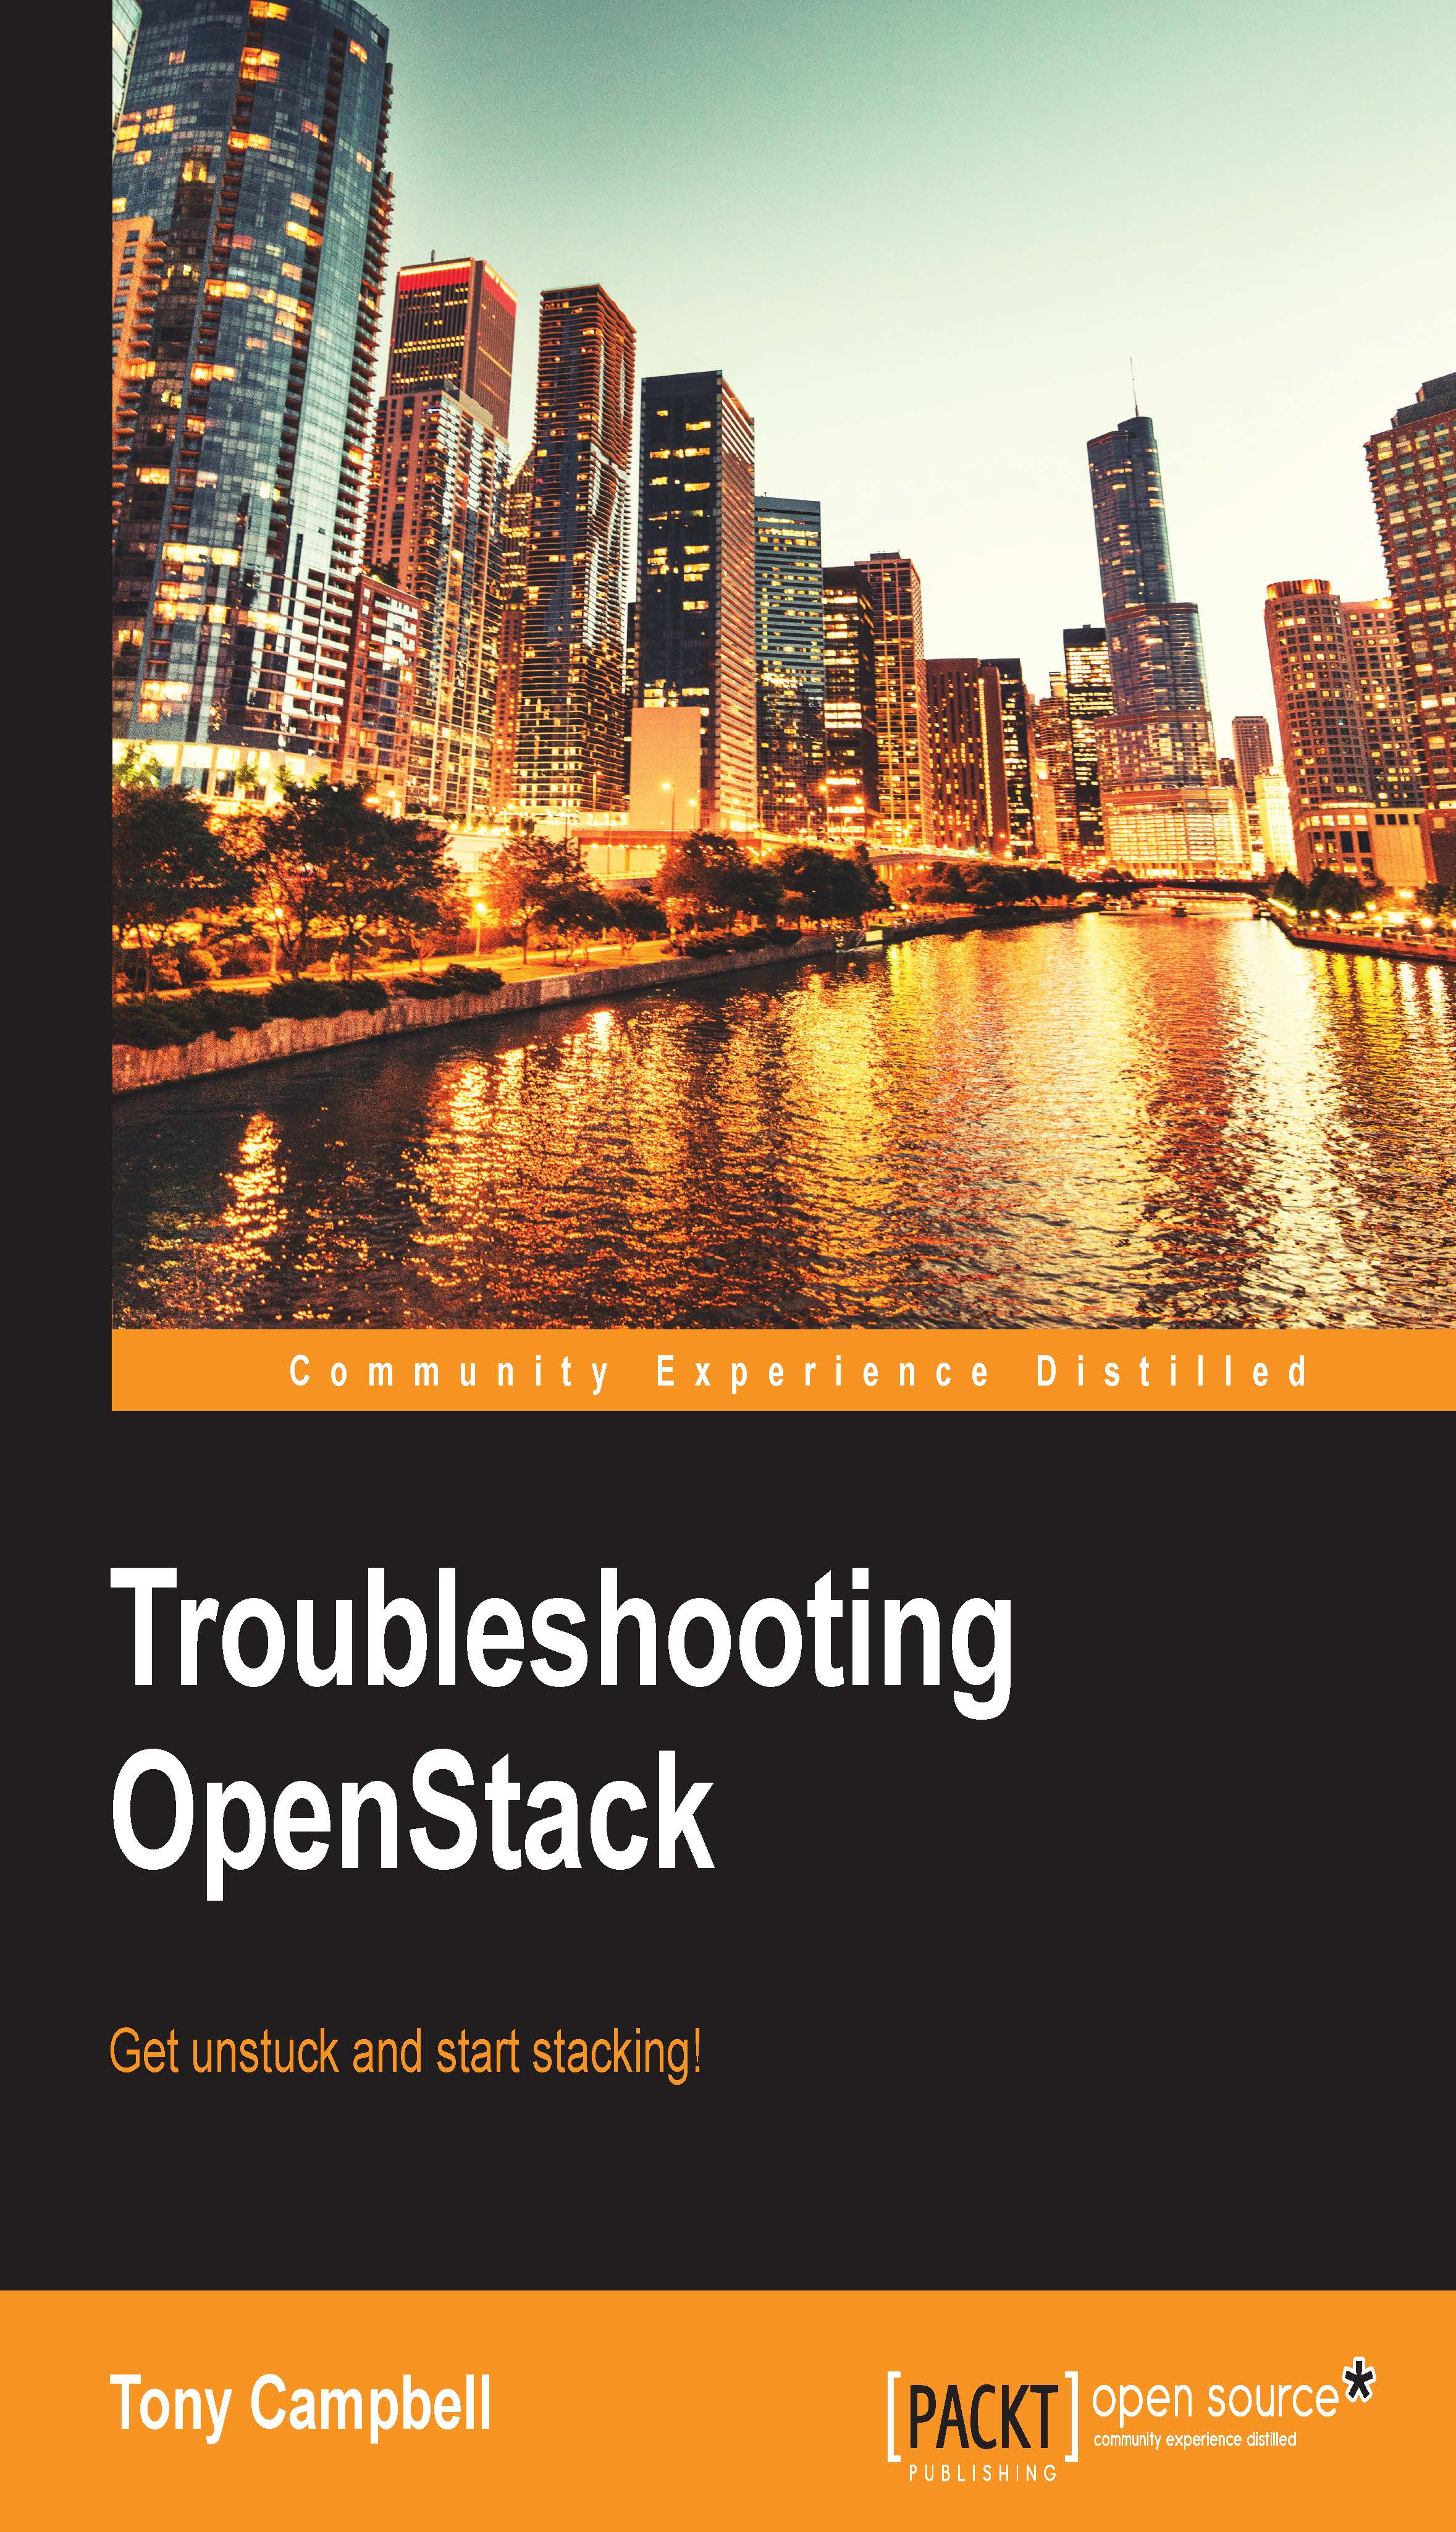 Troubleshooting OpenStack - Tony Campbell